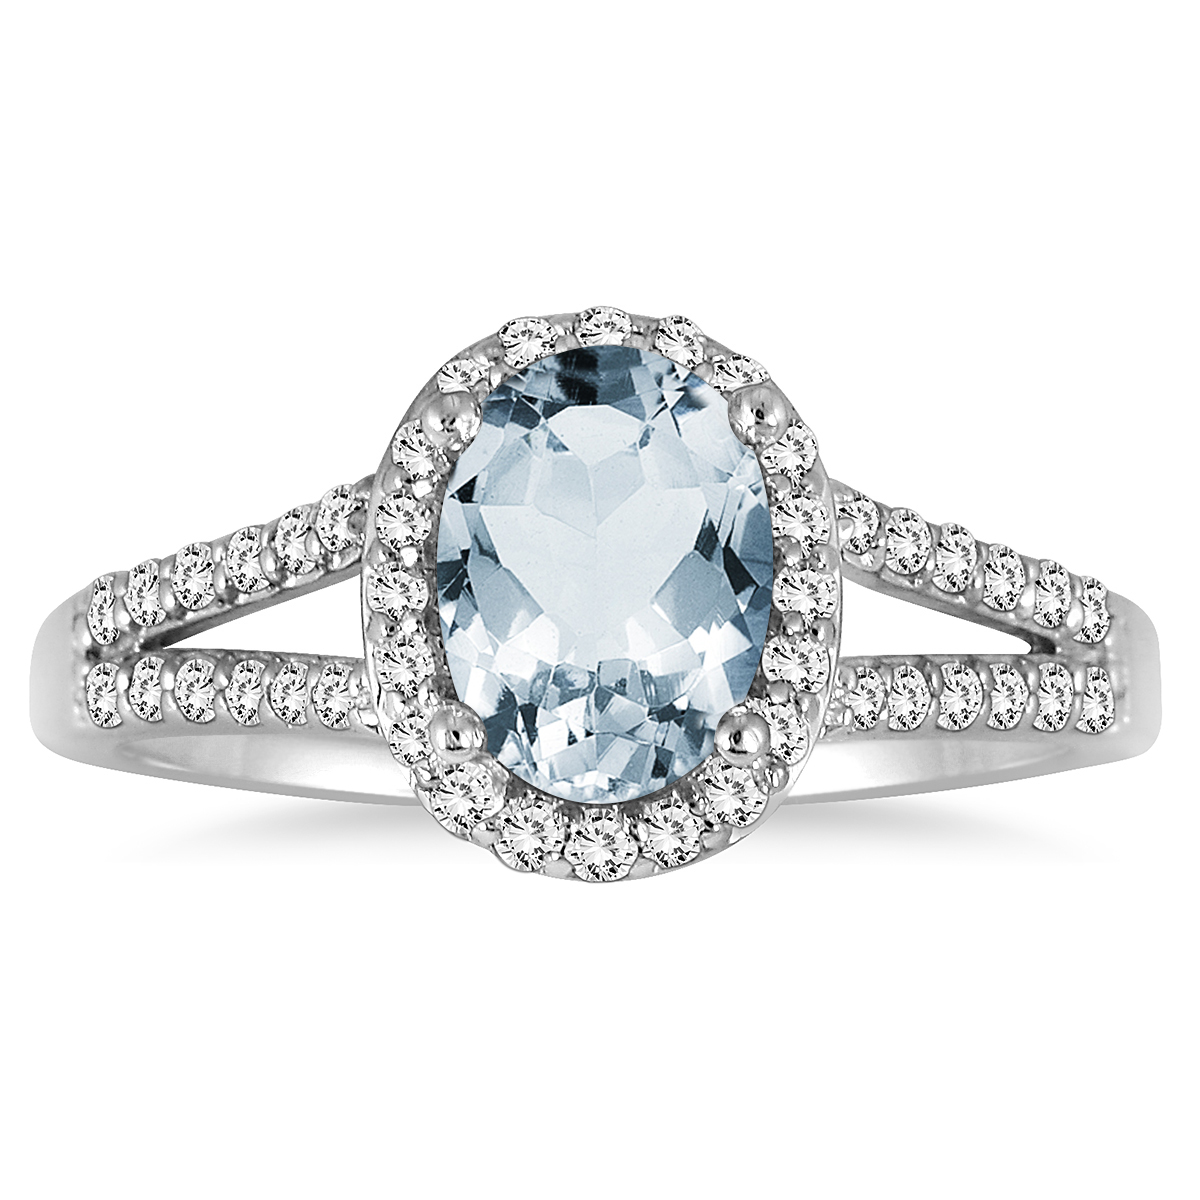 1 1/4 Carat Oval Aquamarine and Diamond Ring in 10K White Gold